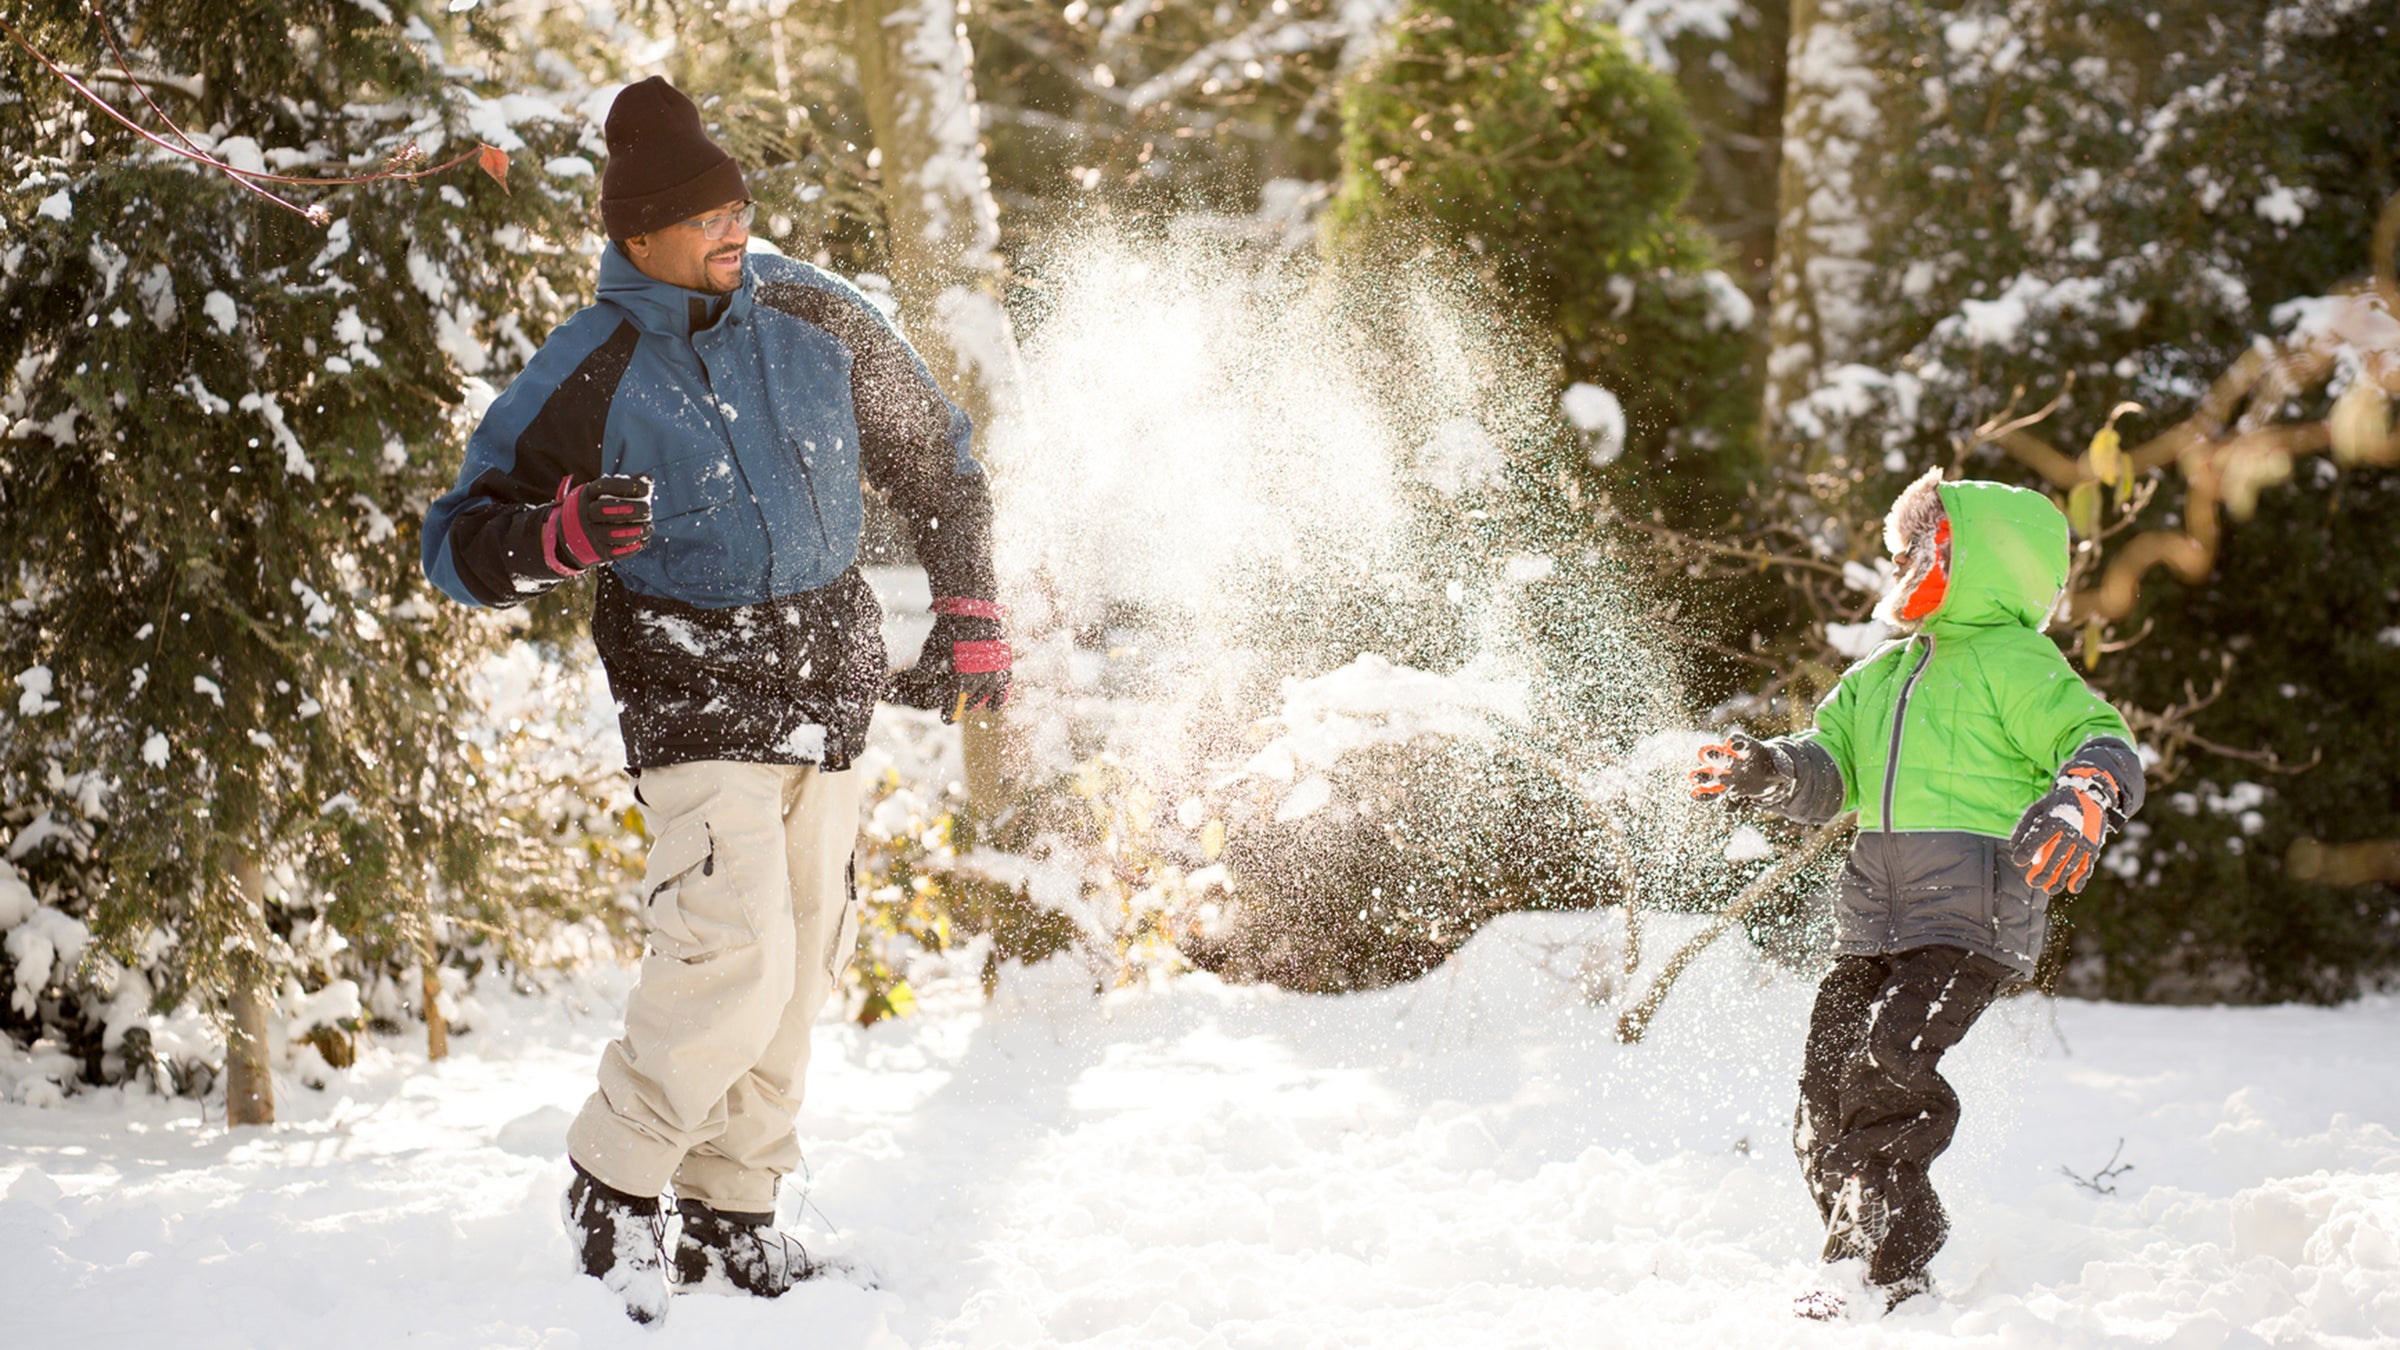 12 Best Kids Snow Gear And Ski Clothes